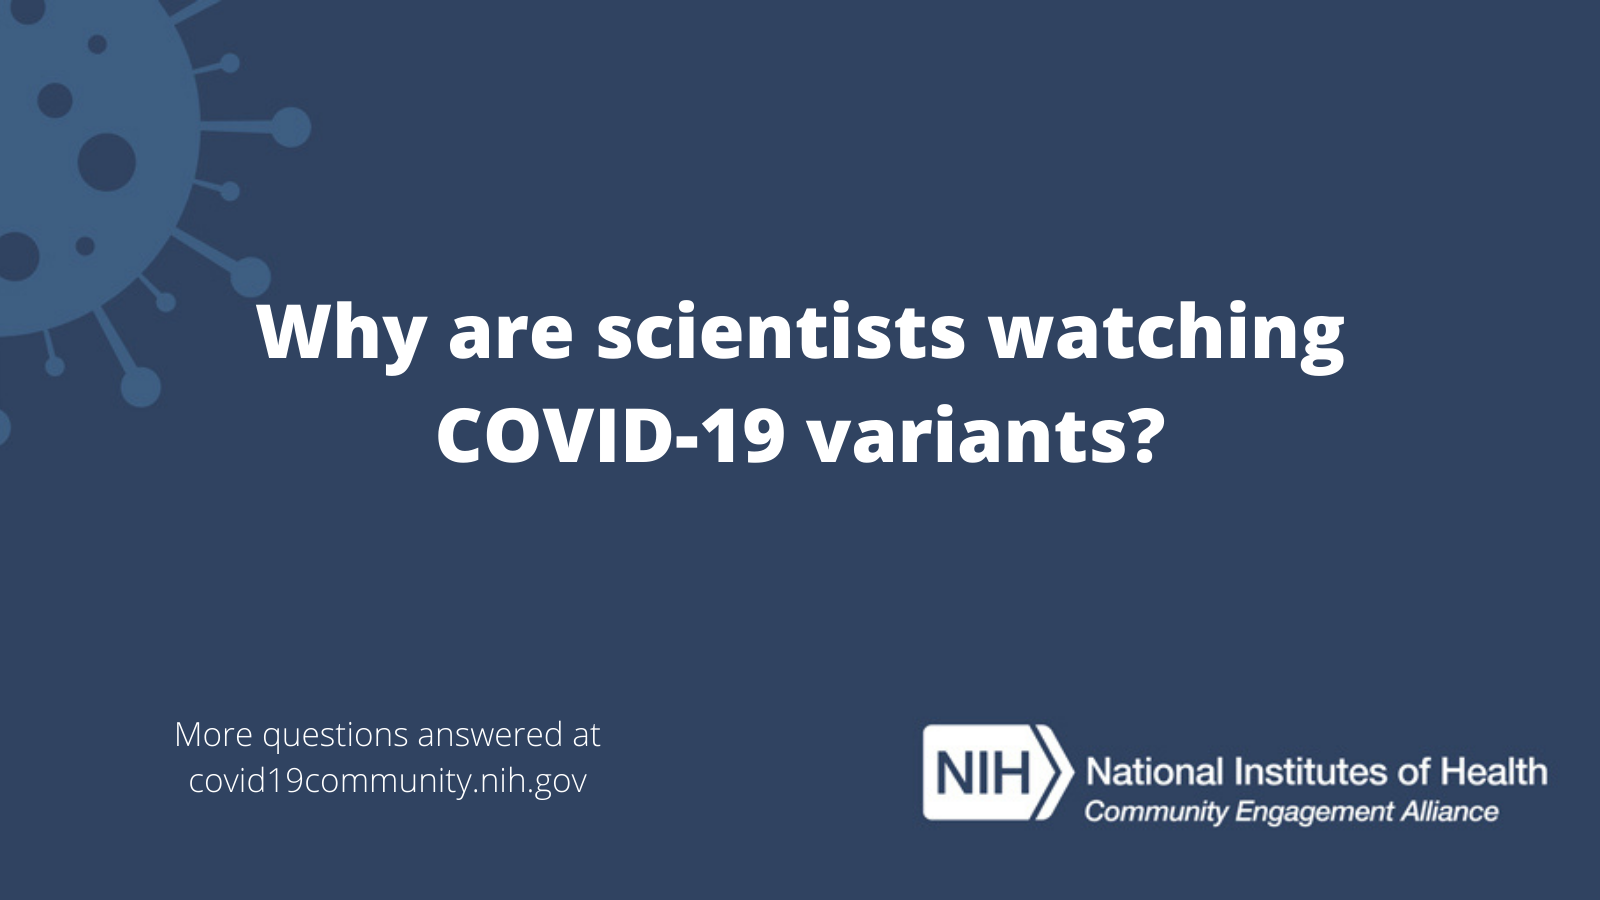 Why are scientists watching COVID-19 variants? More vaccine questions answered at covid19community.nih.gov